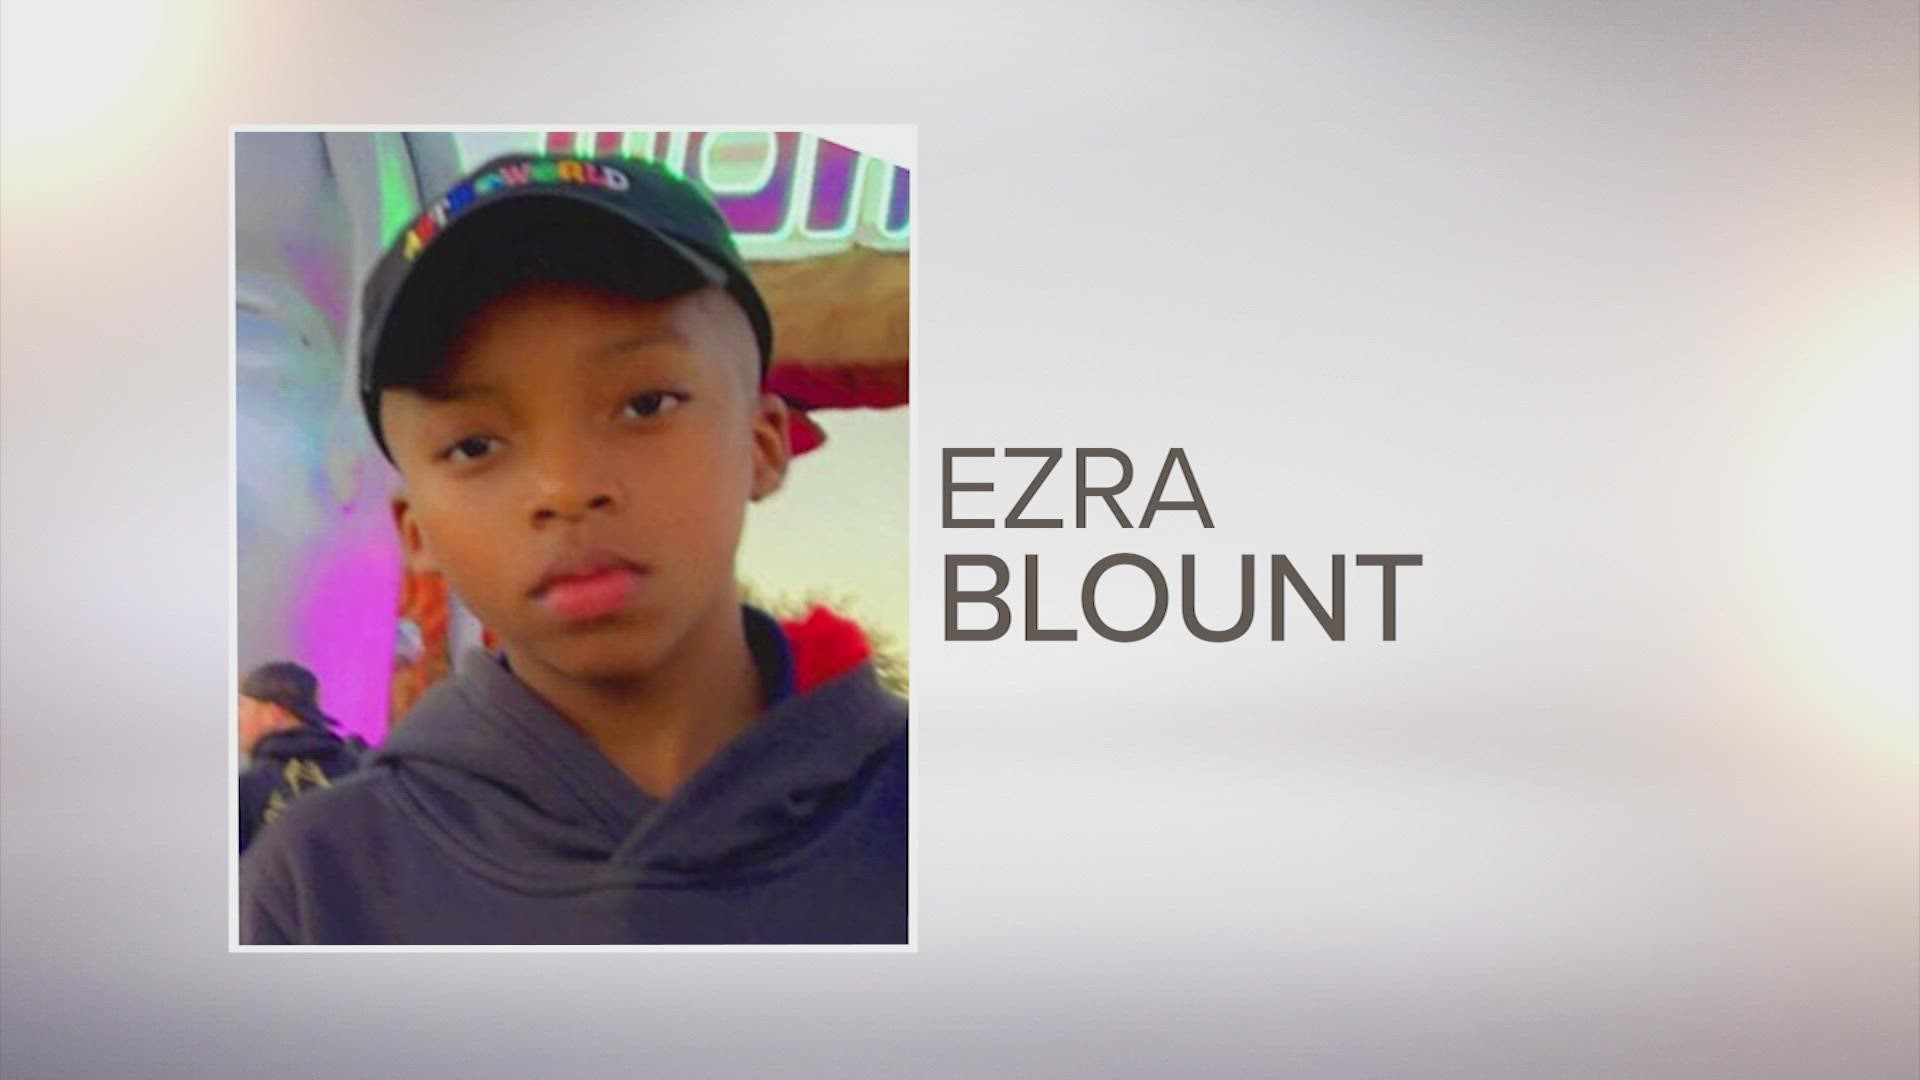 Ezra had been on a ventilator and was in a medically induced coma at Texas Children's Hospital since he was injured during the Travis Scott show on Nov. 5.